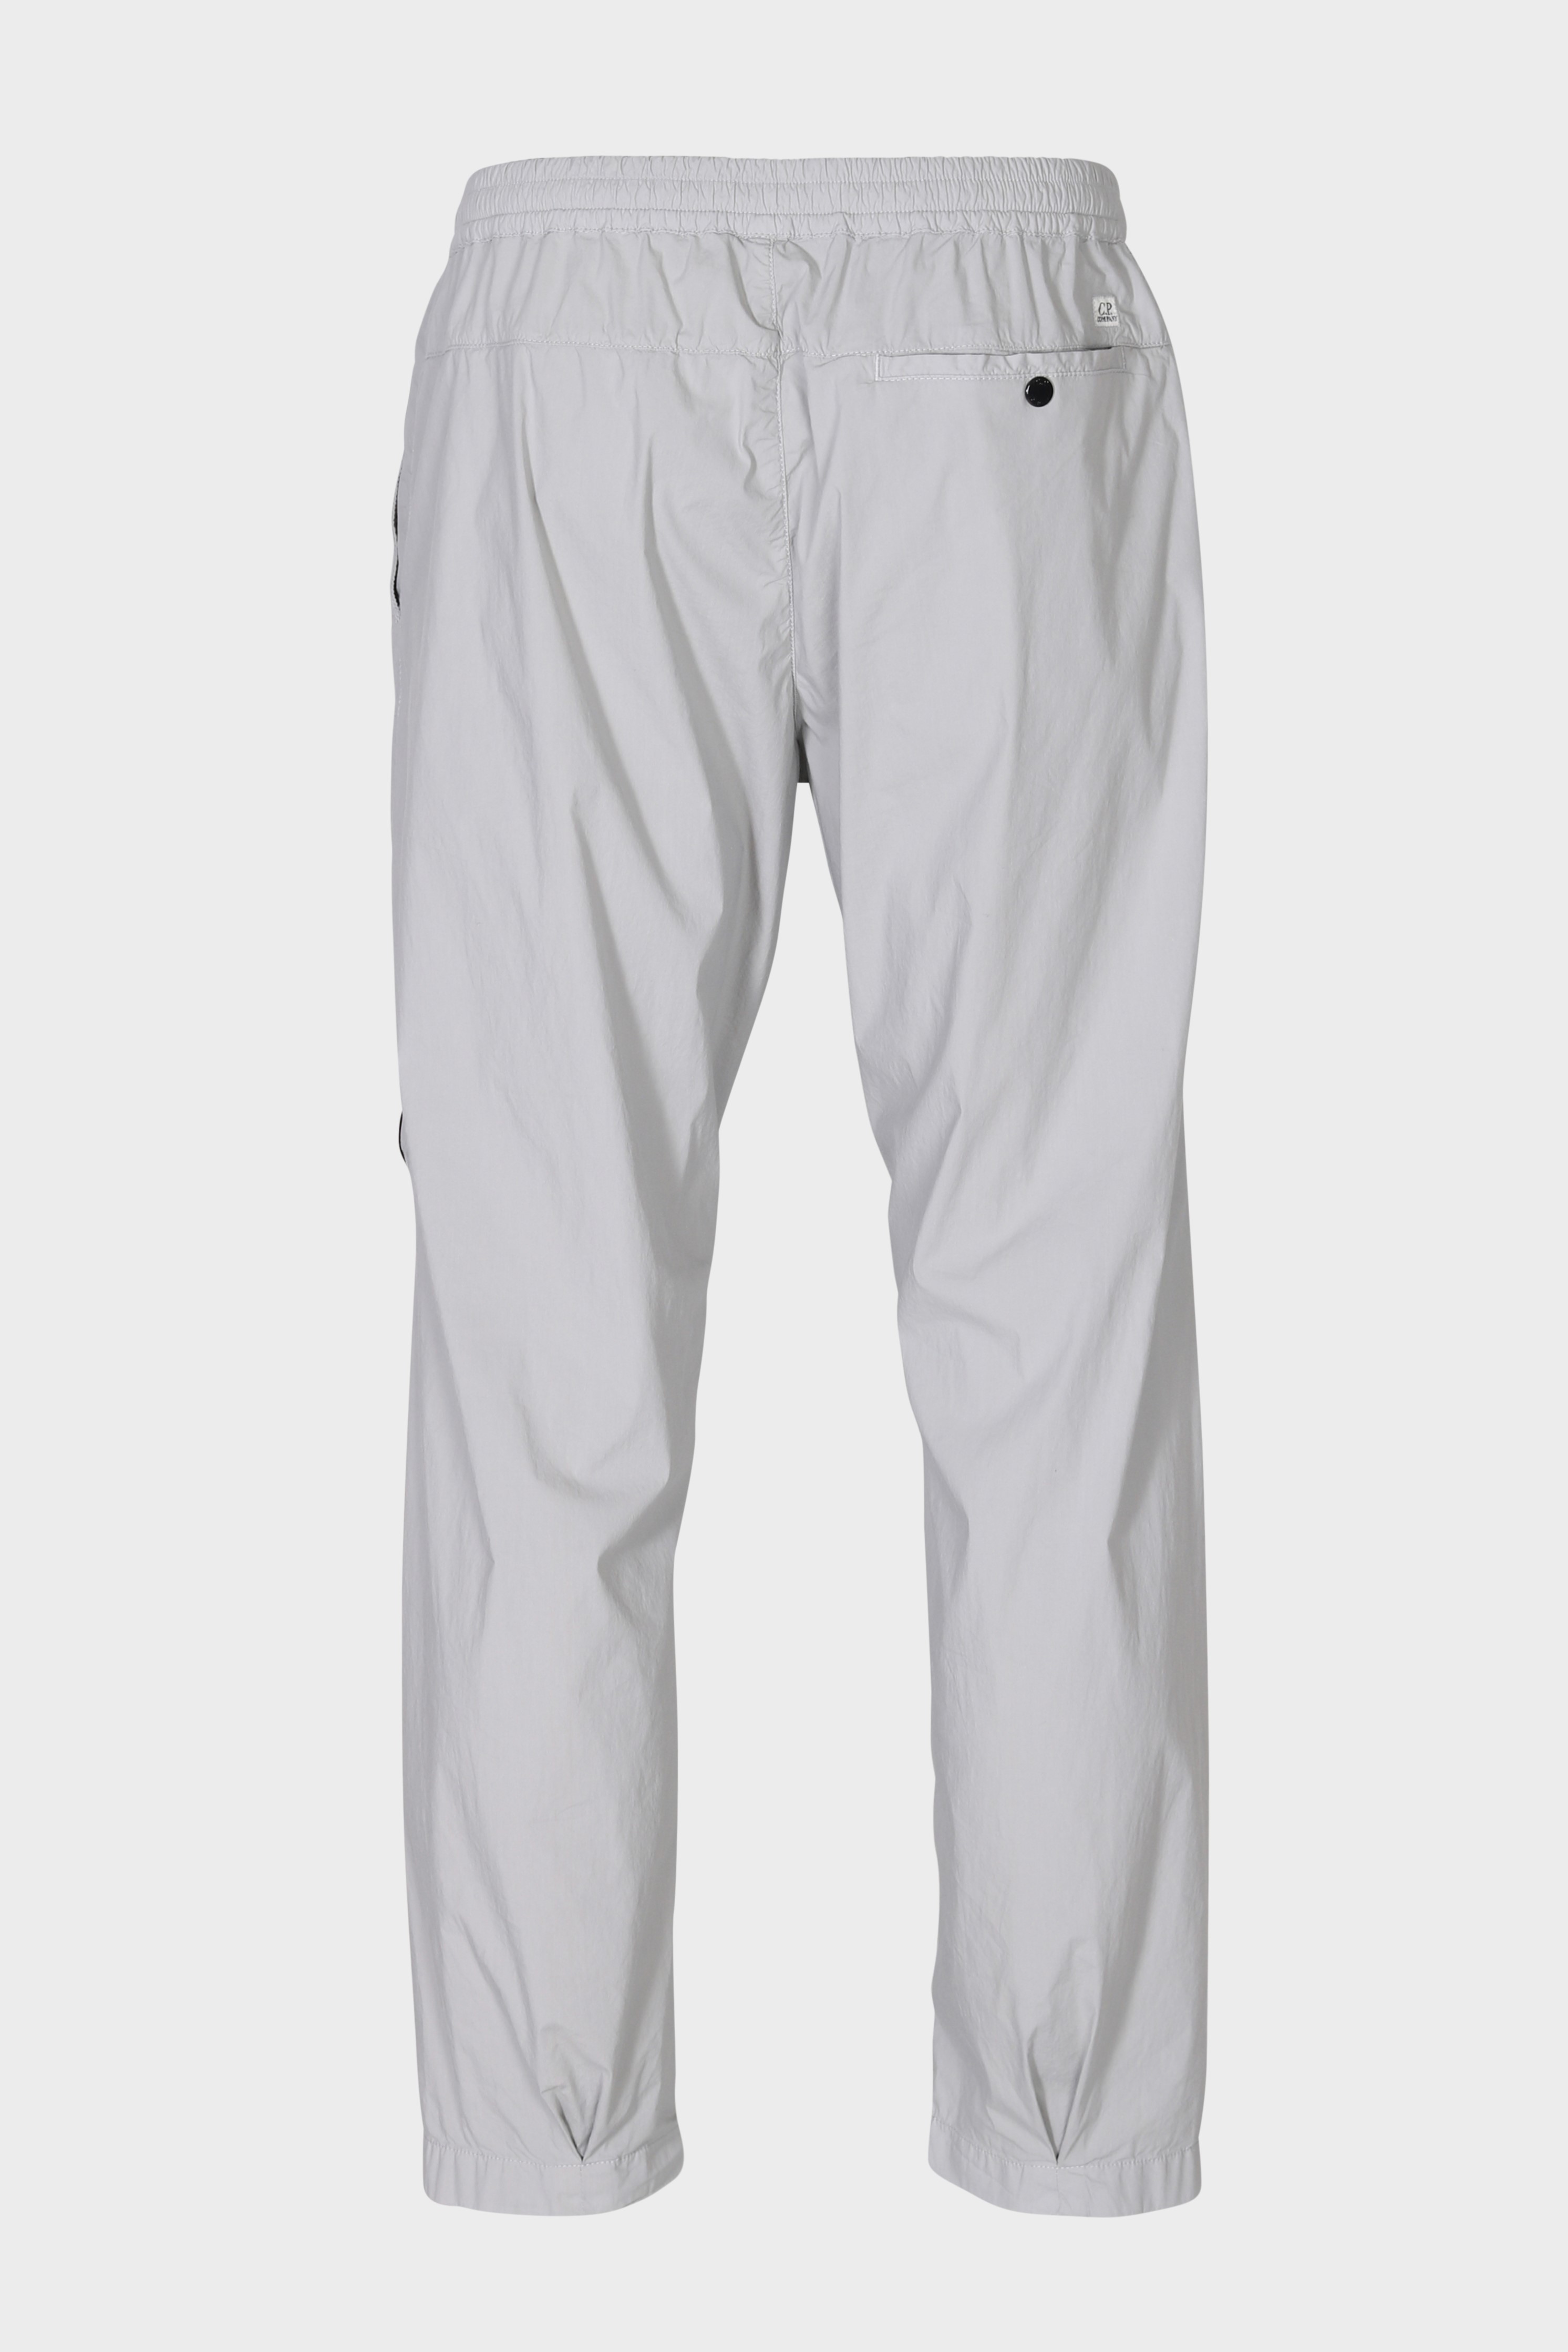 C.P. COMPANY Cargo Pant in Drizzle Grey 46